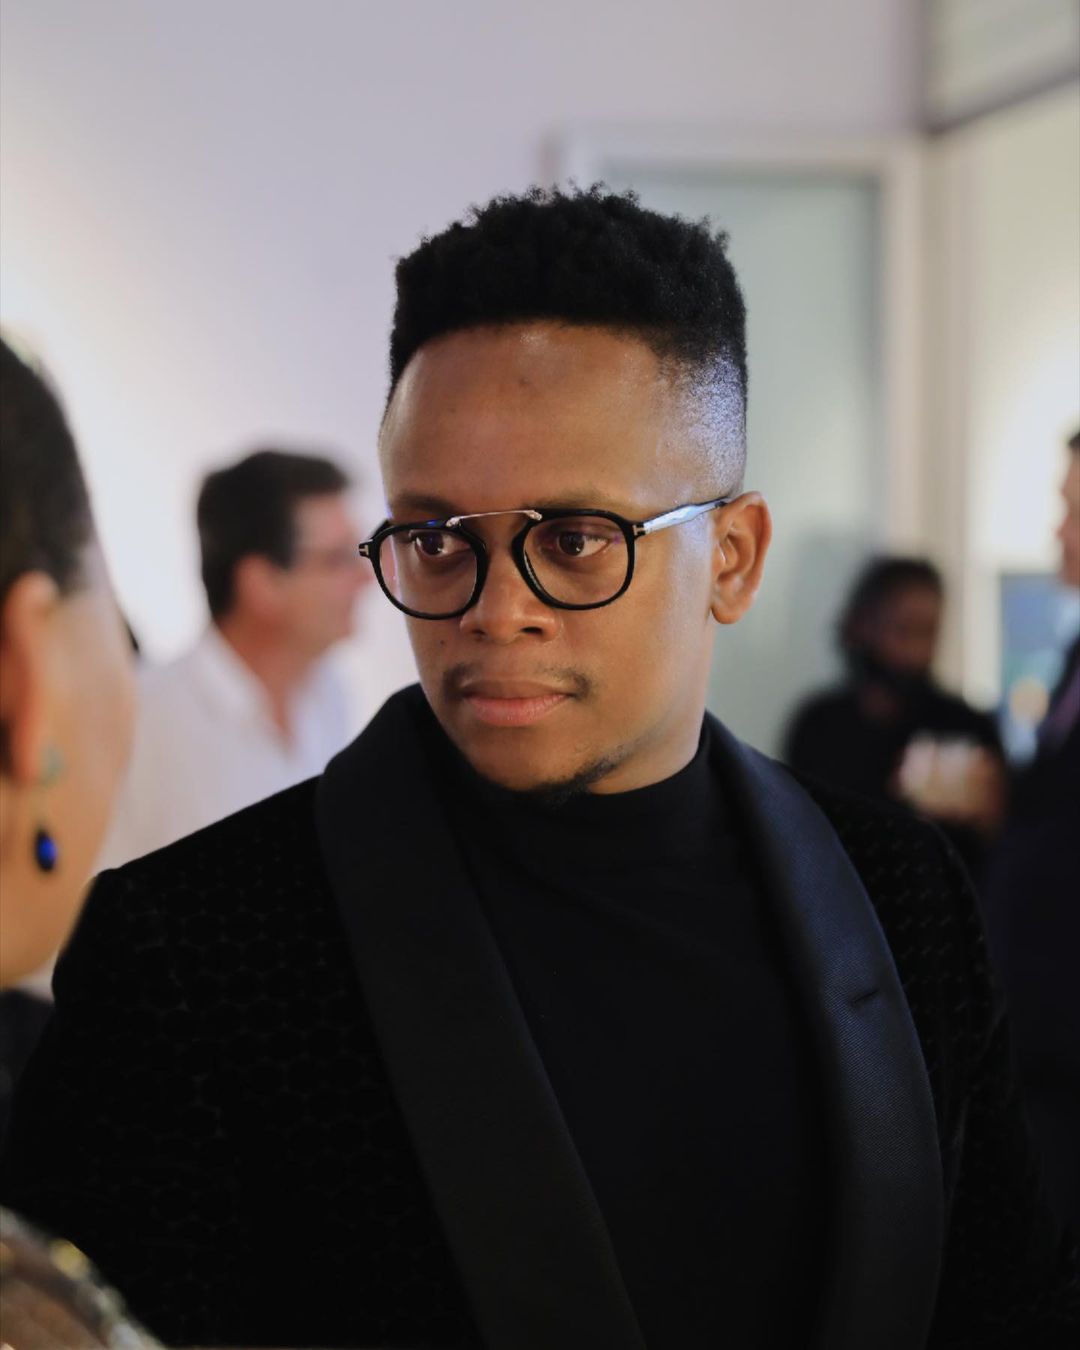 Dinner At Somizi's Producer Legend Finally Speaks On Theft Allegations